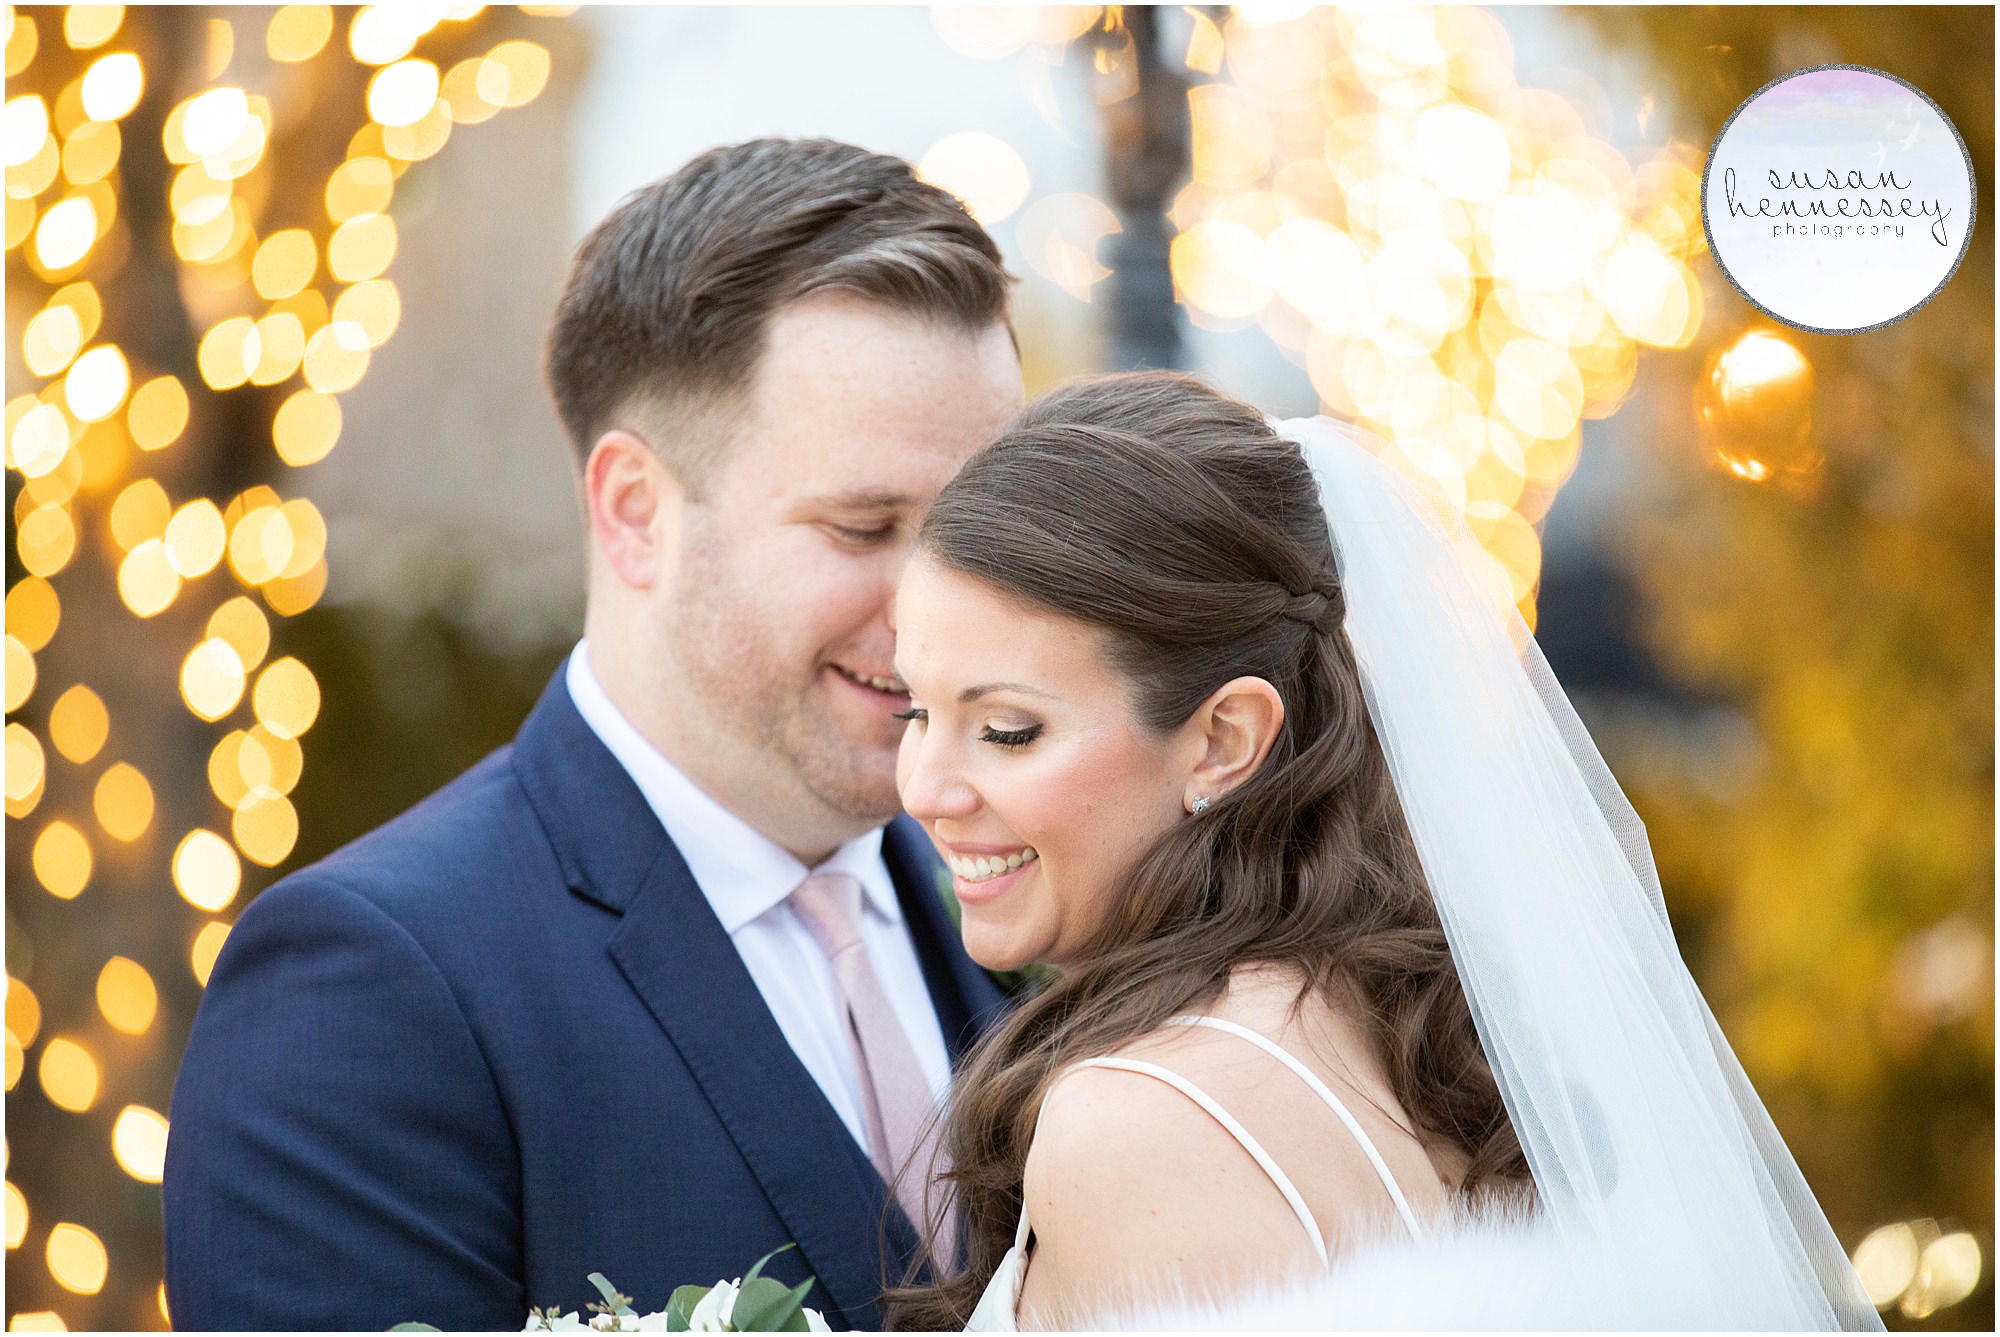 A beautiful winter wedding at the Park Savoy Estate